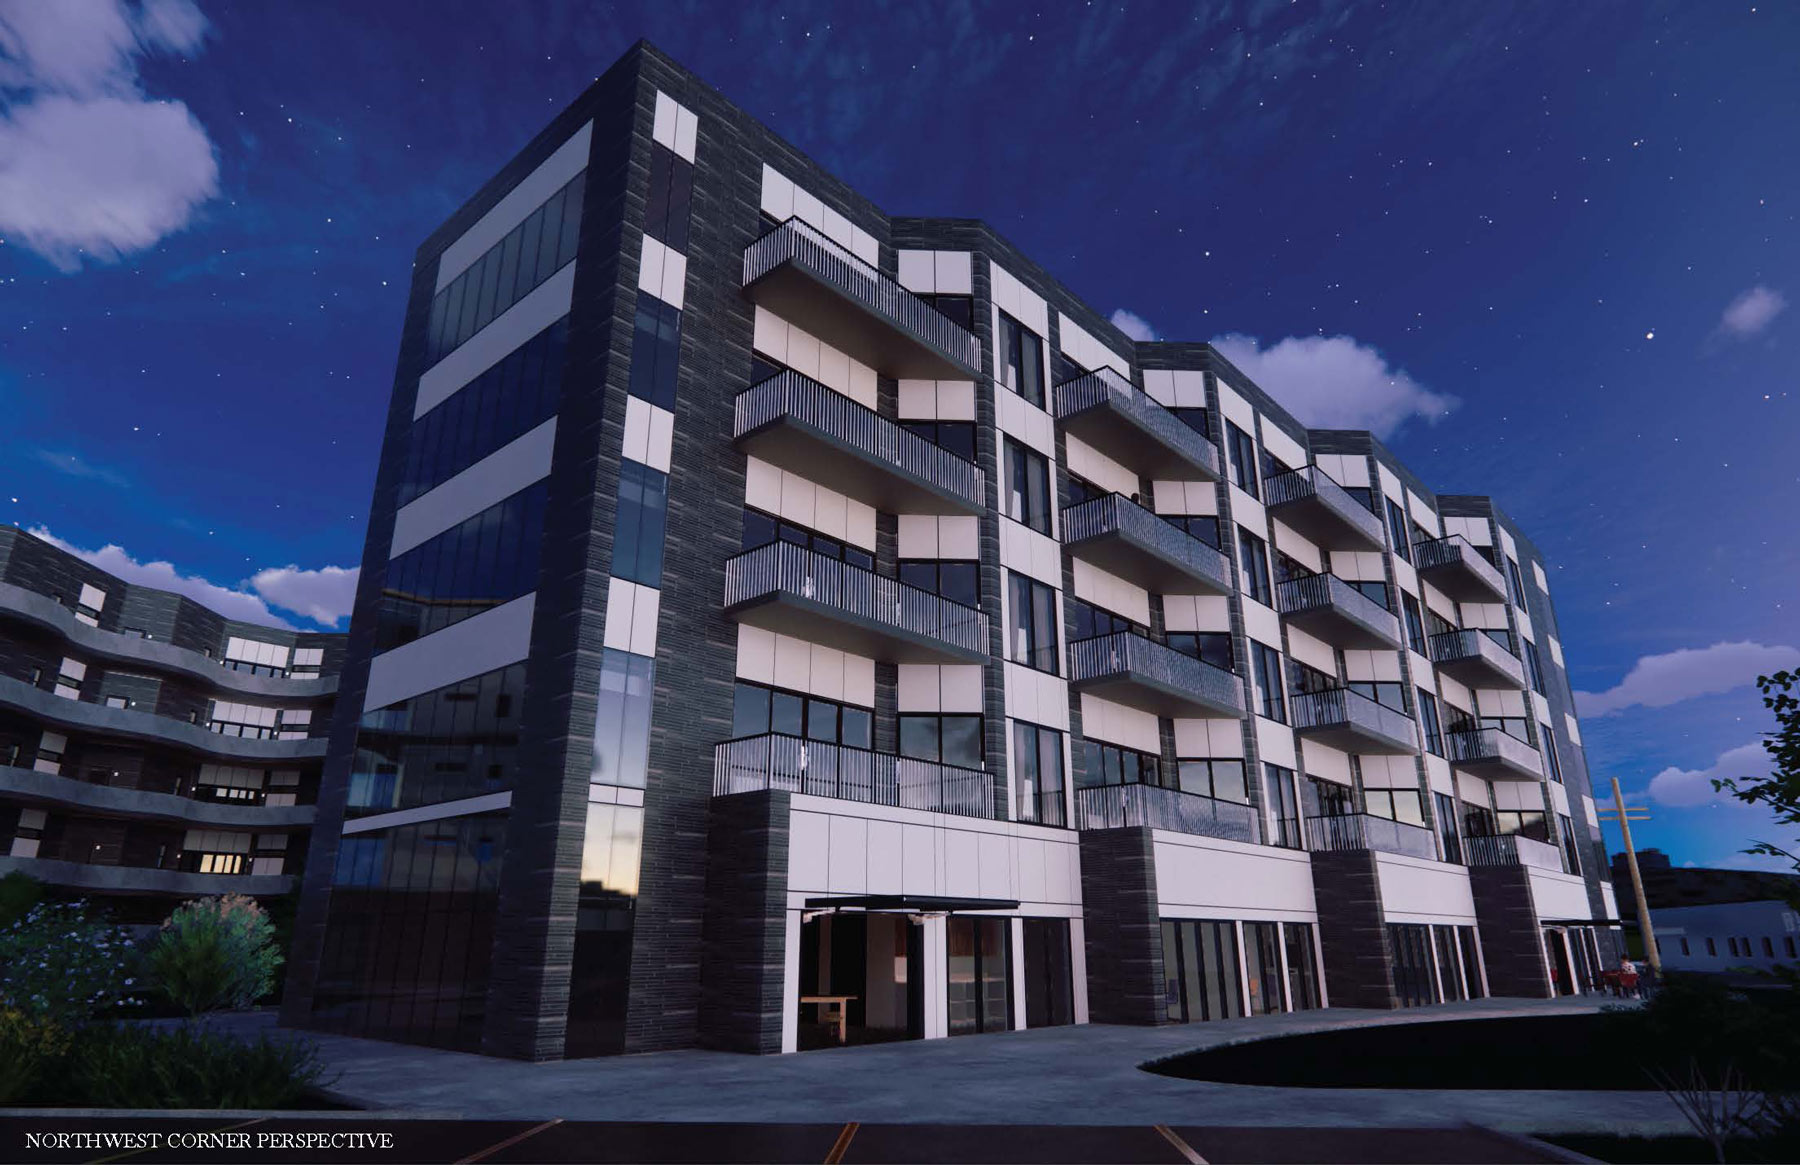 exterior rendering by Emily Hammons showing outside of multi-story building from parking lot - view from front left angle